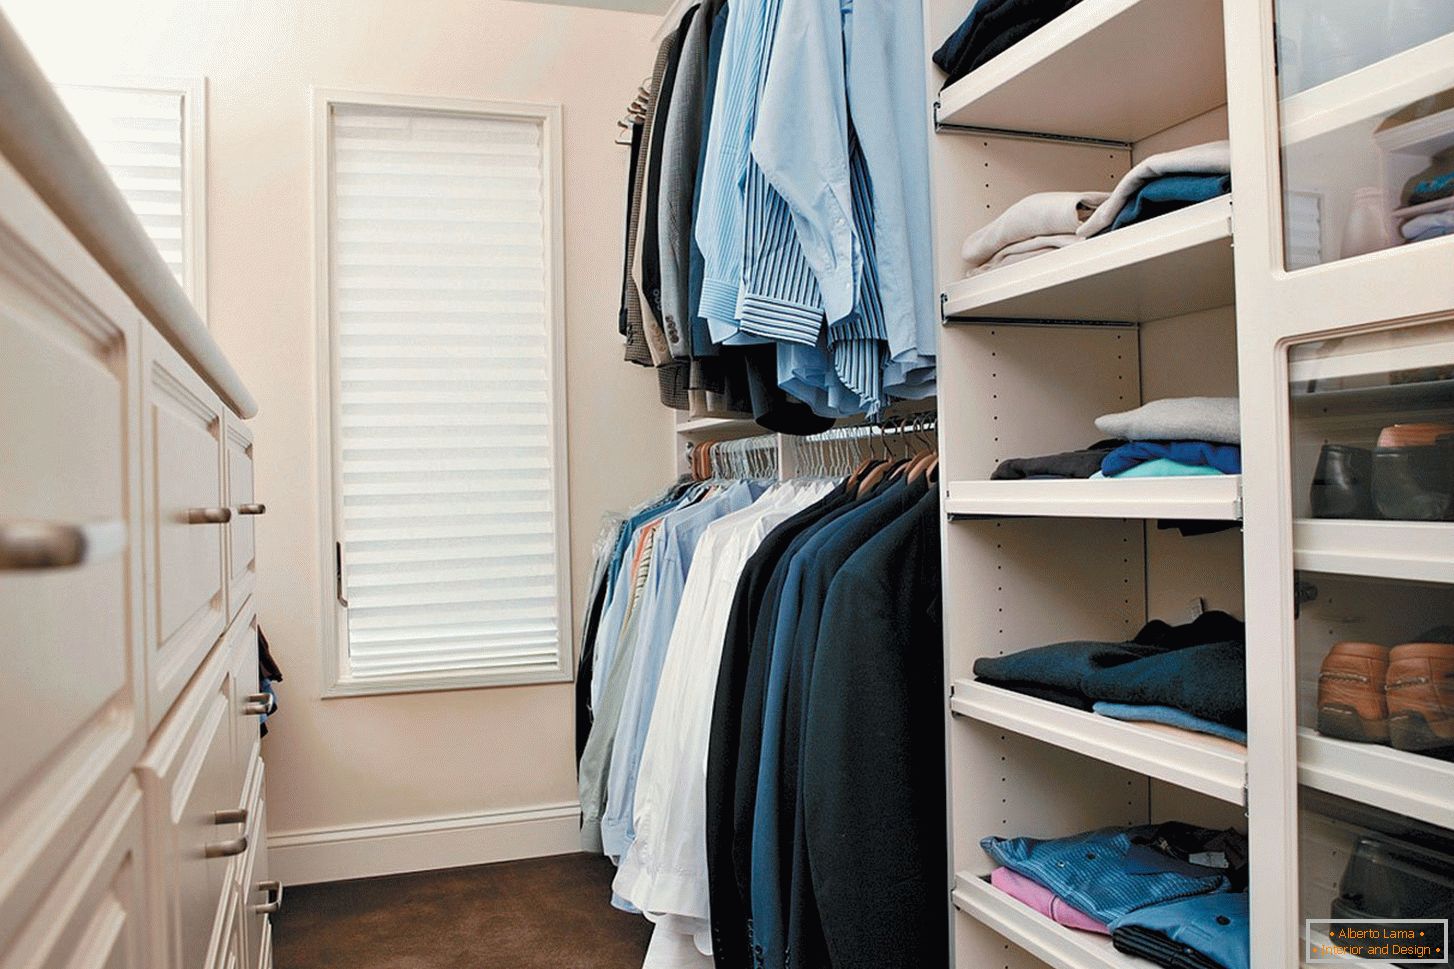 Functional dressing room: a former small storeroom